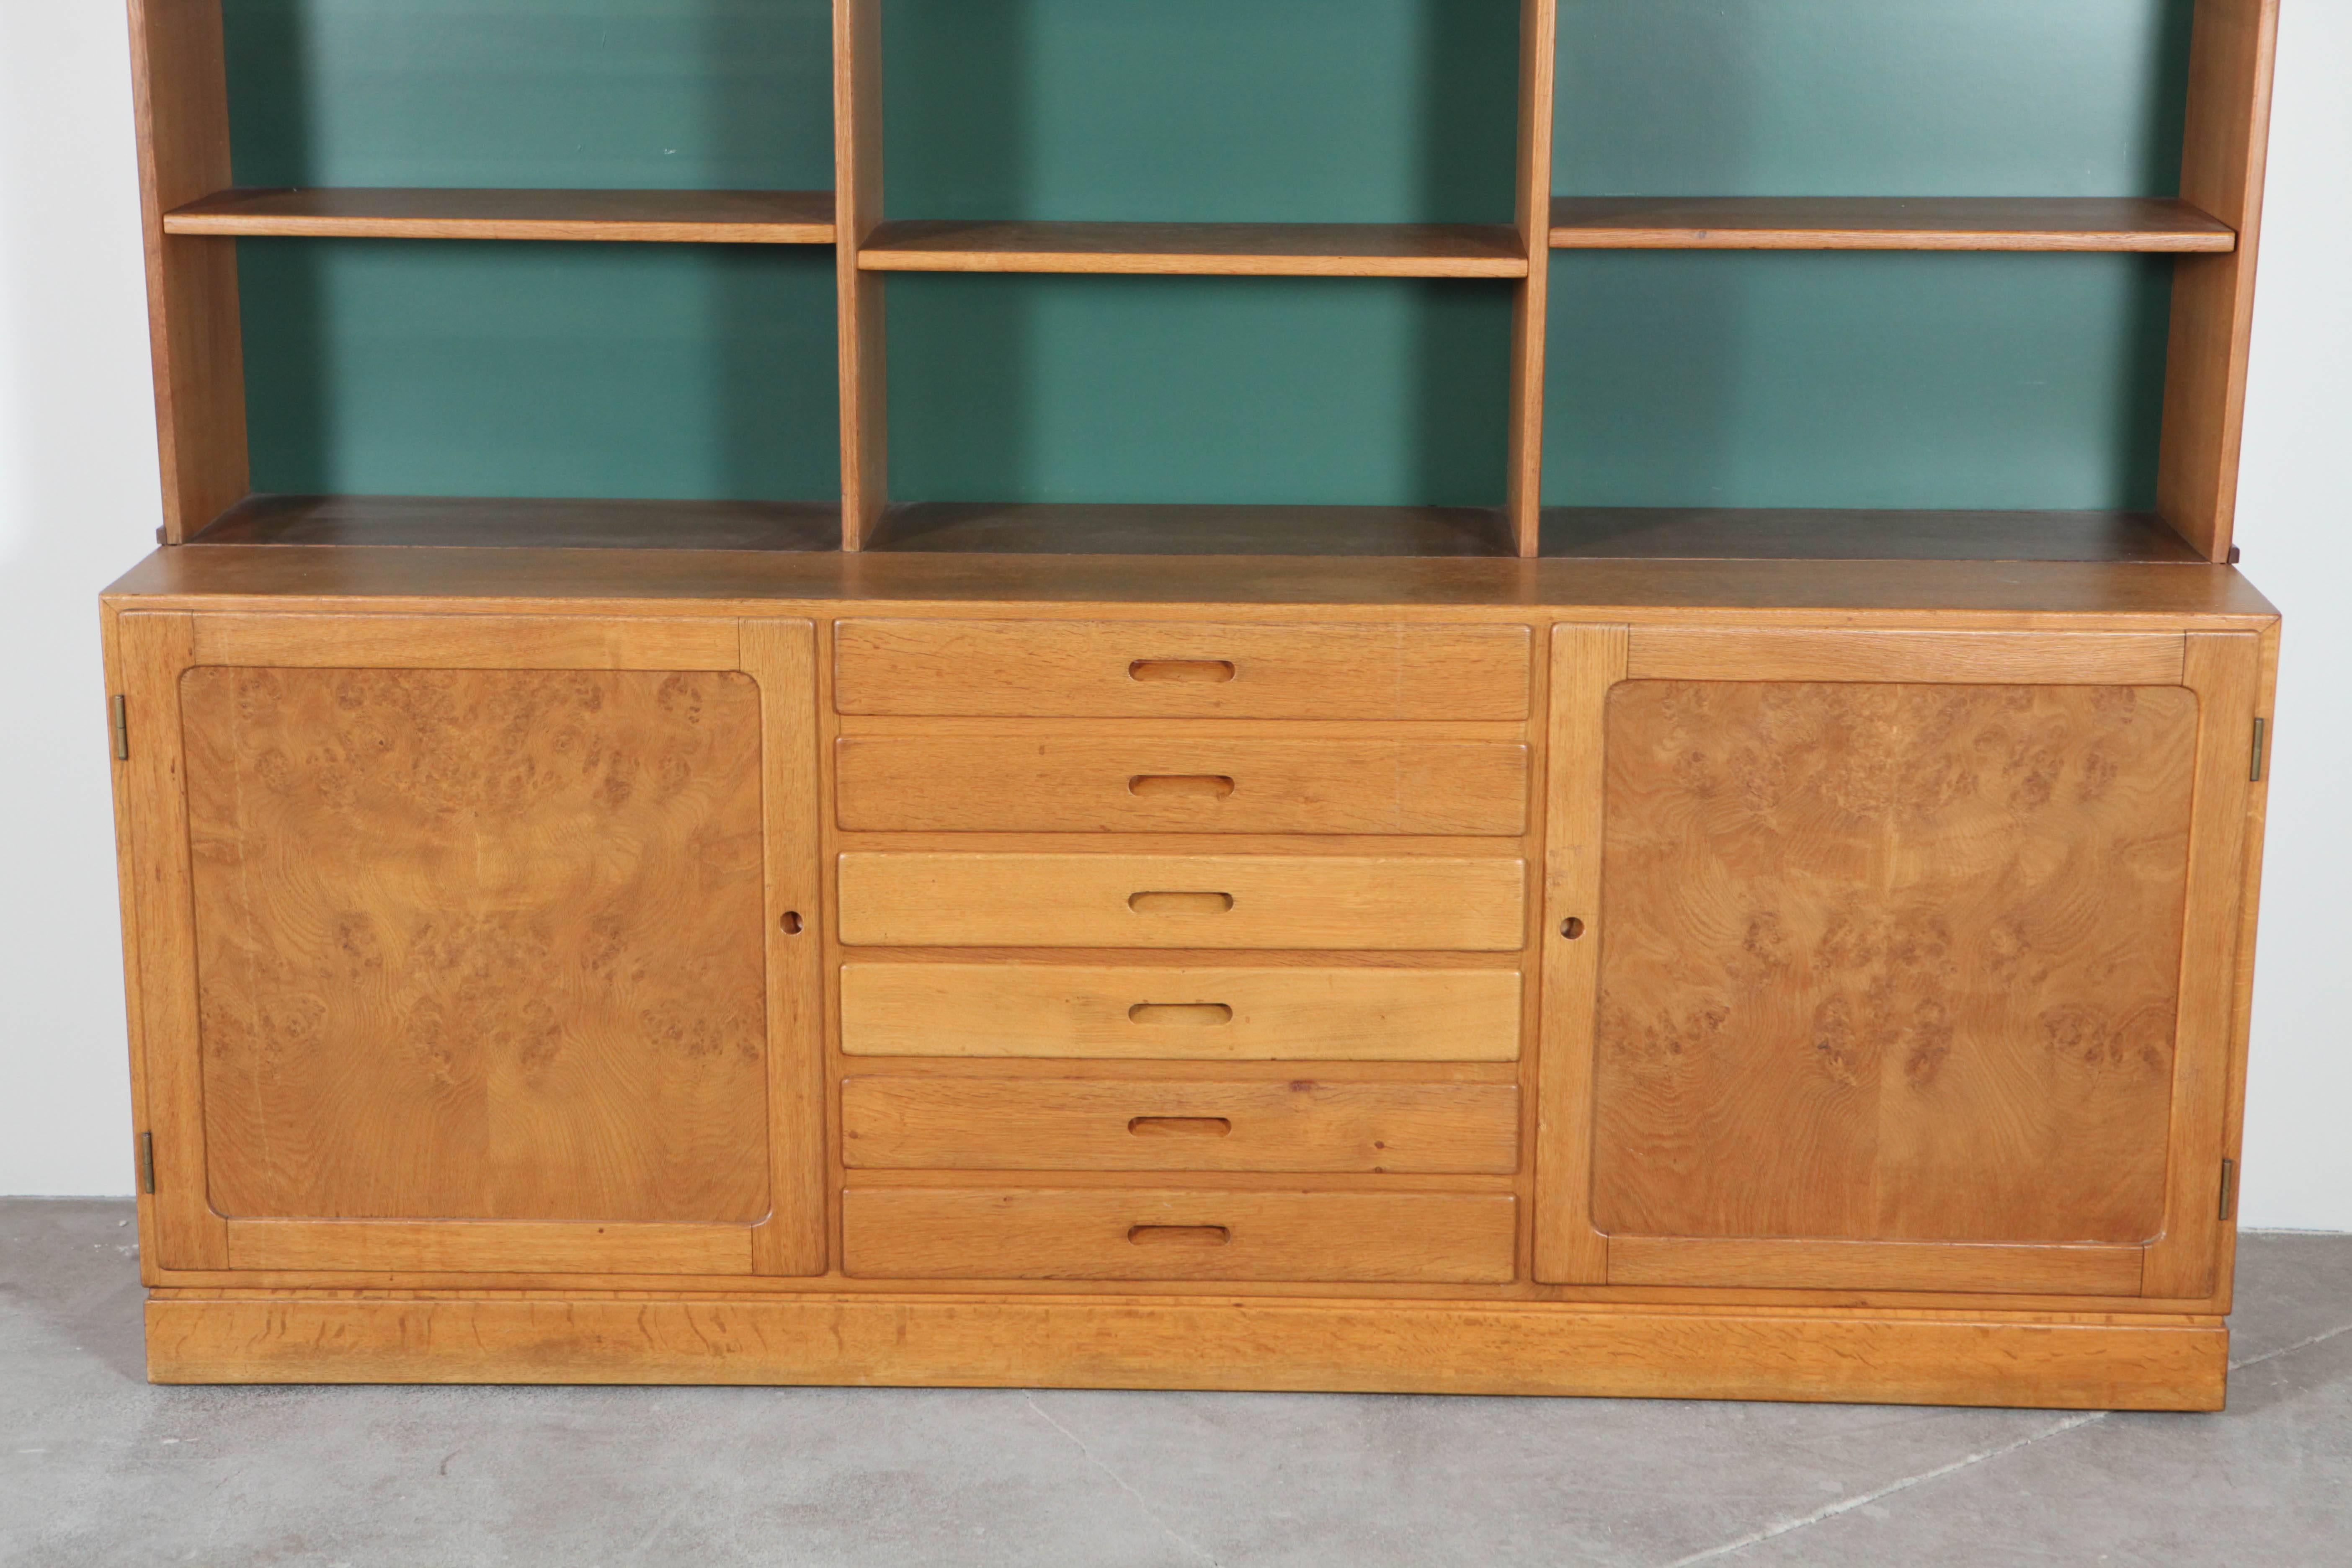 Mid-Century Danish burlwood cabinet and bookshelf. Green backing. One cabinet has hole drilled out for electrical outlets. Top of lower cabinet measures 28.5